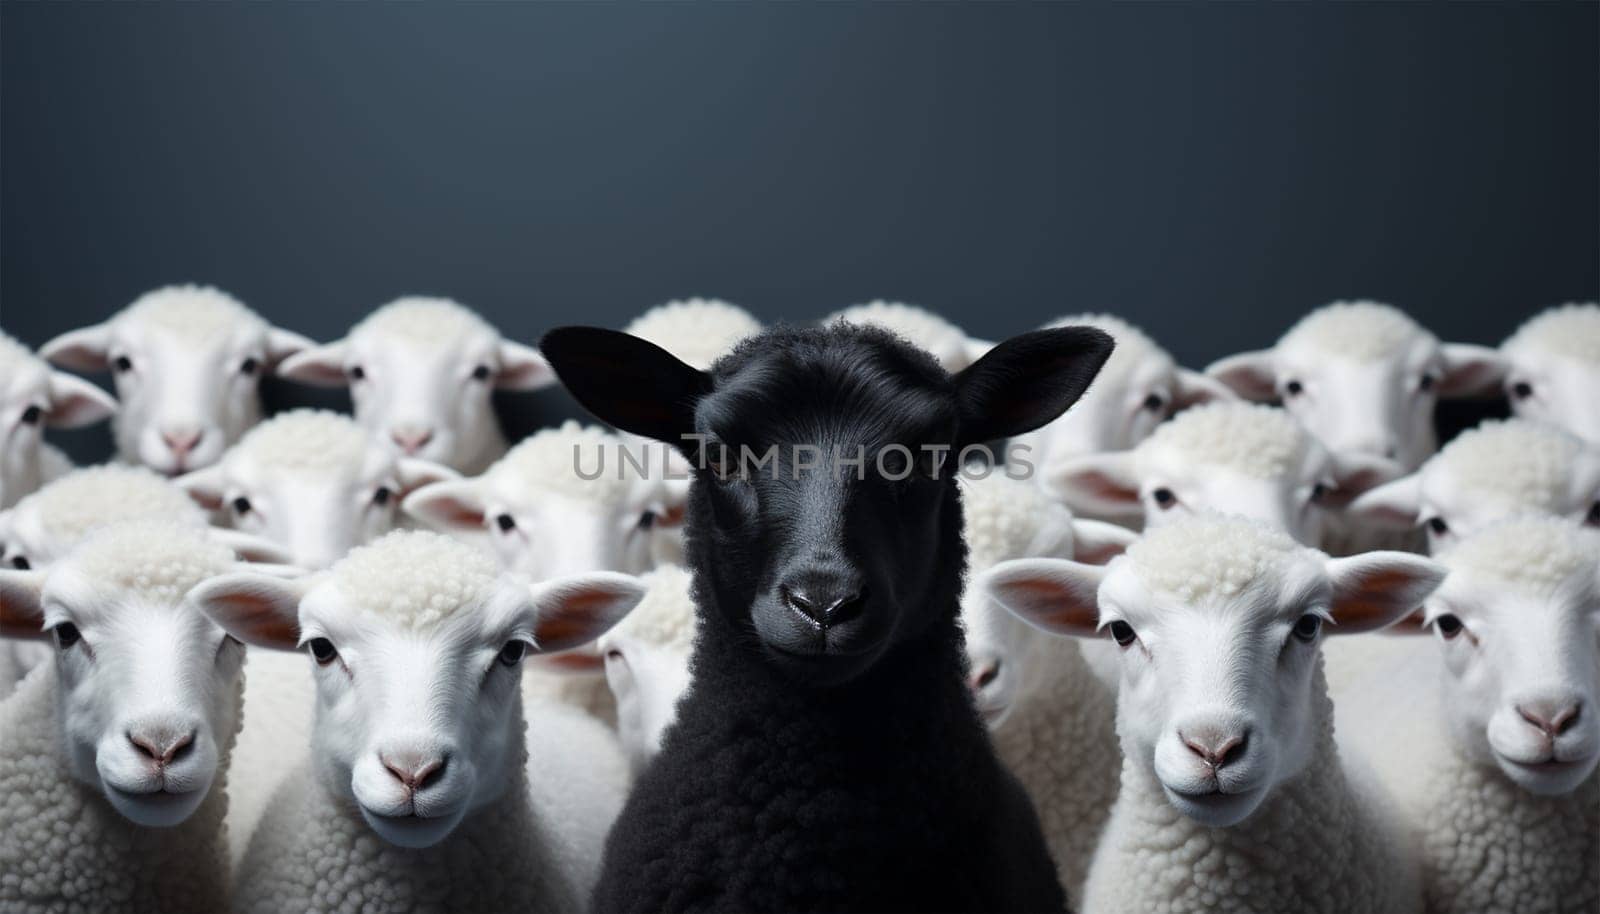 Standing out of the crowd. Dare to be different concept. A black sheep among the herd of white sheep. Black sheep of the family concept design by Annebel146